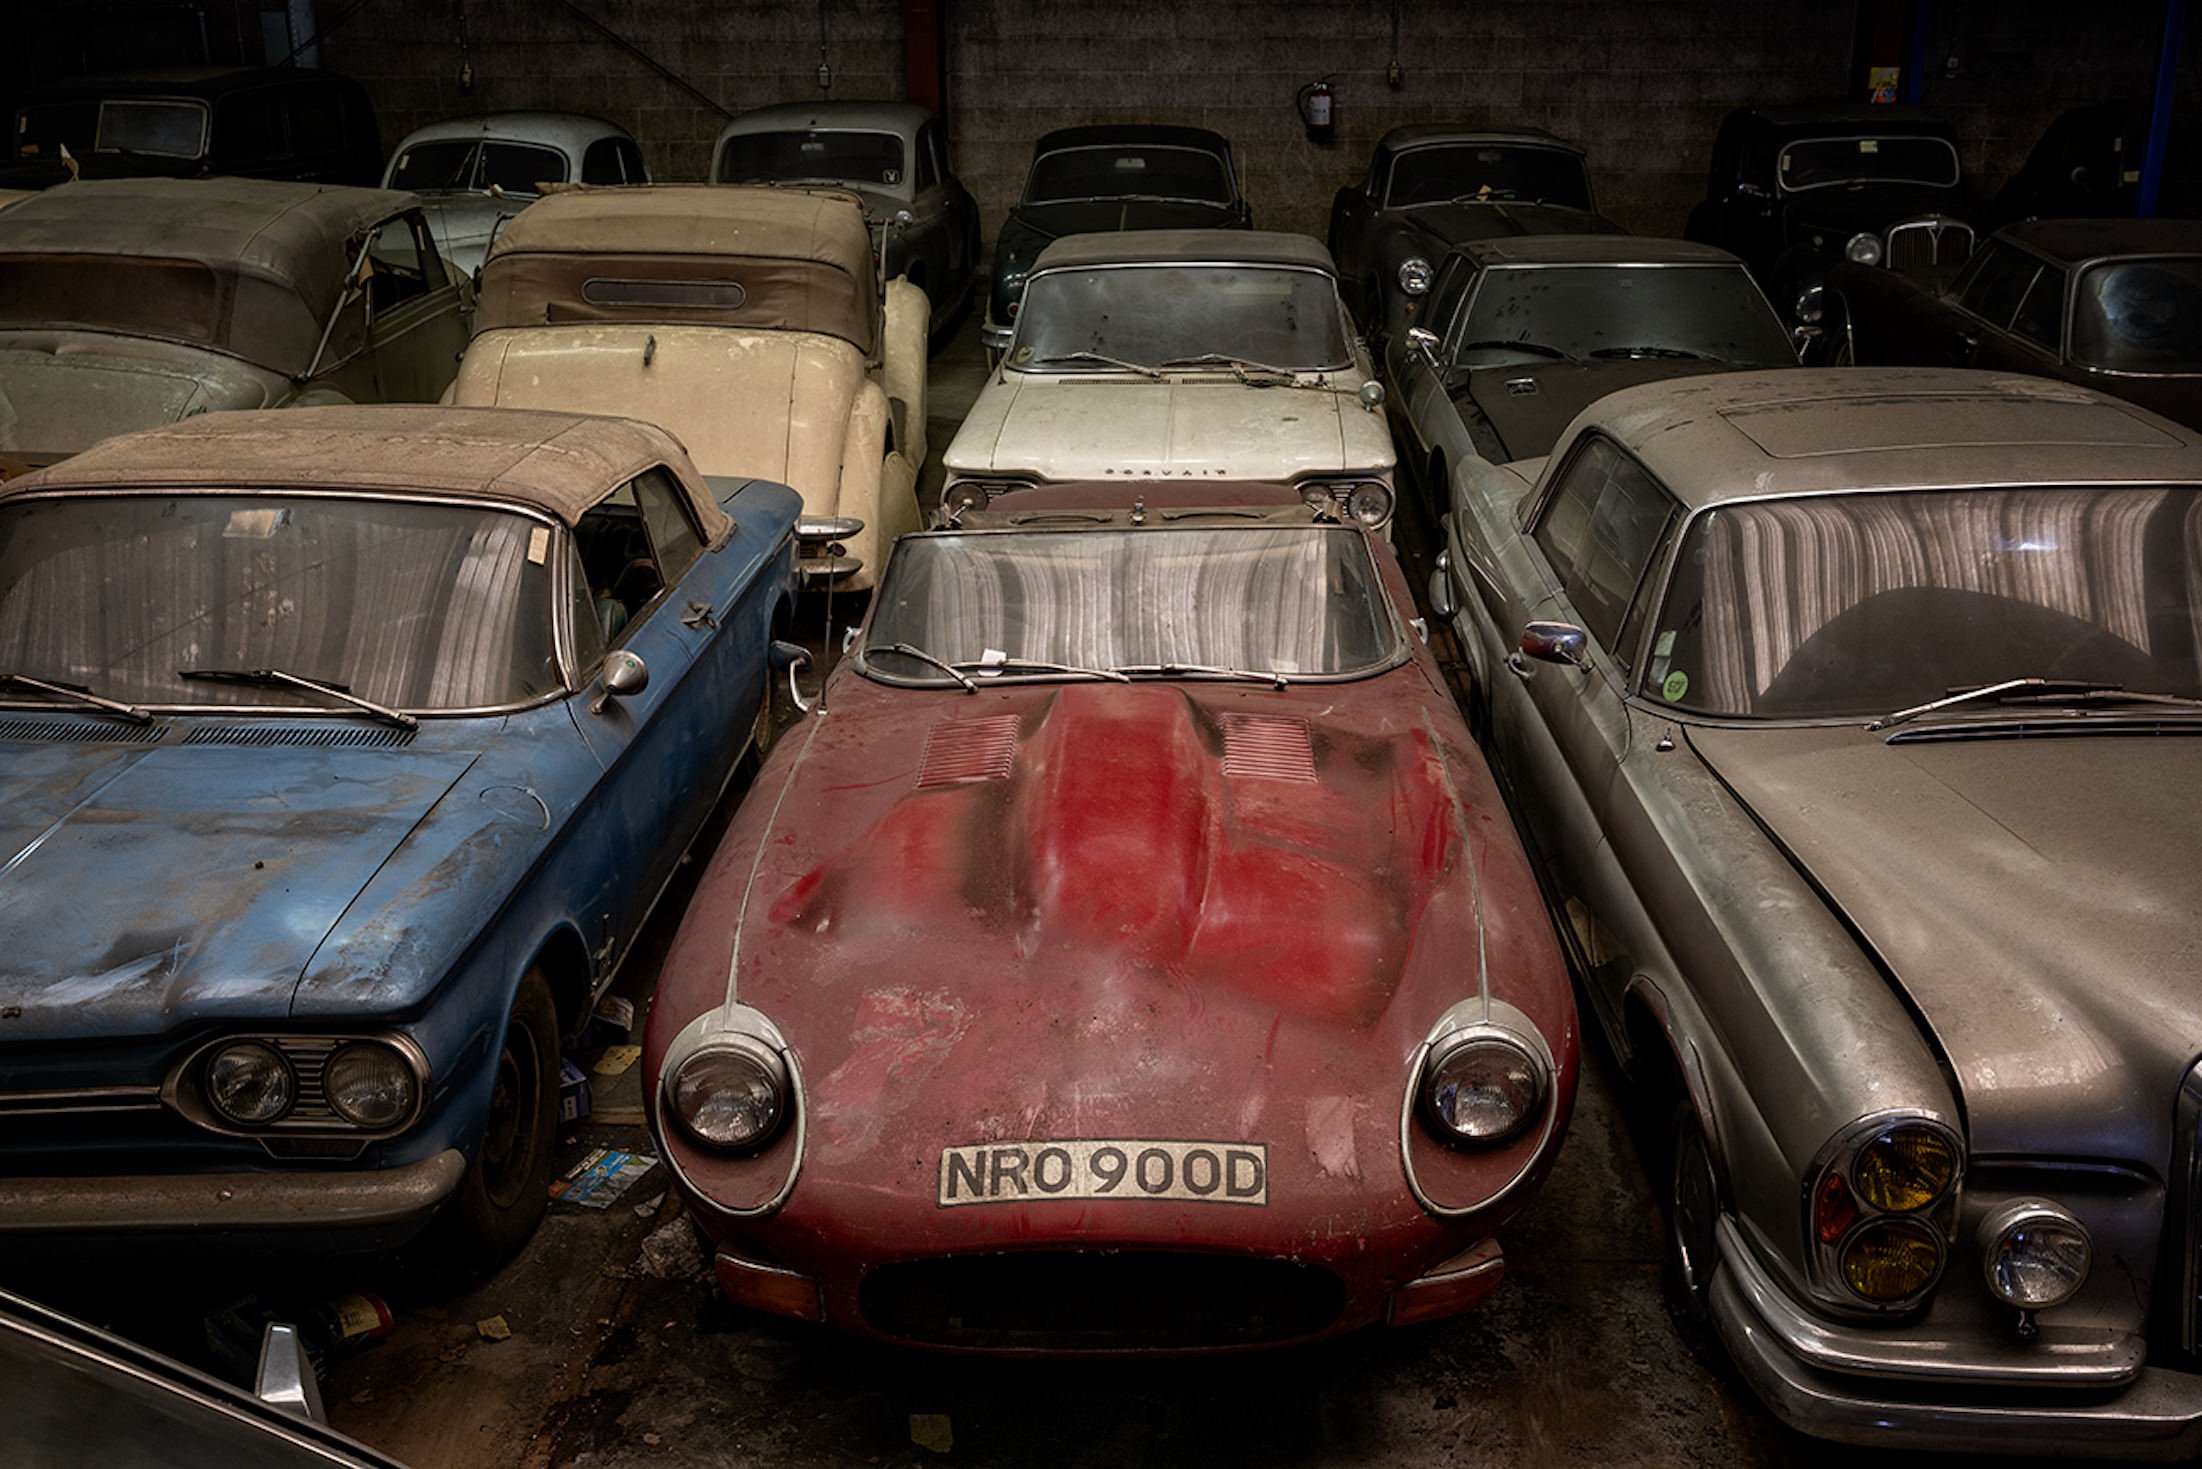 This 'Barn-Find' In An Old Church In The Netherlands Is Going Up